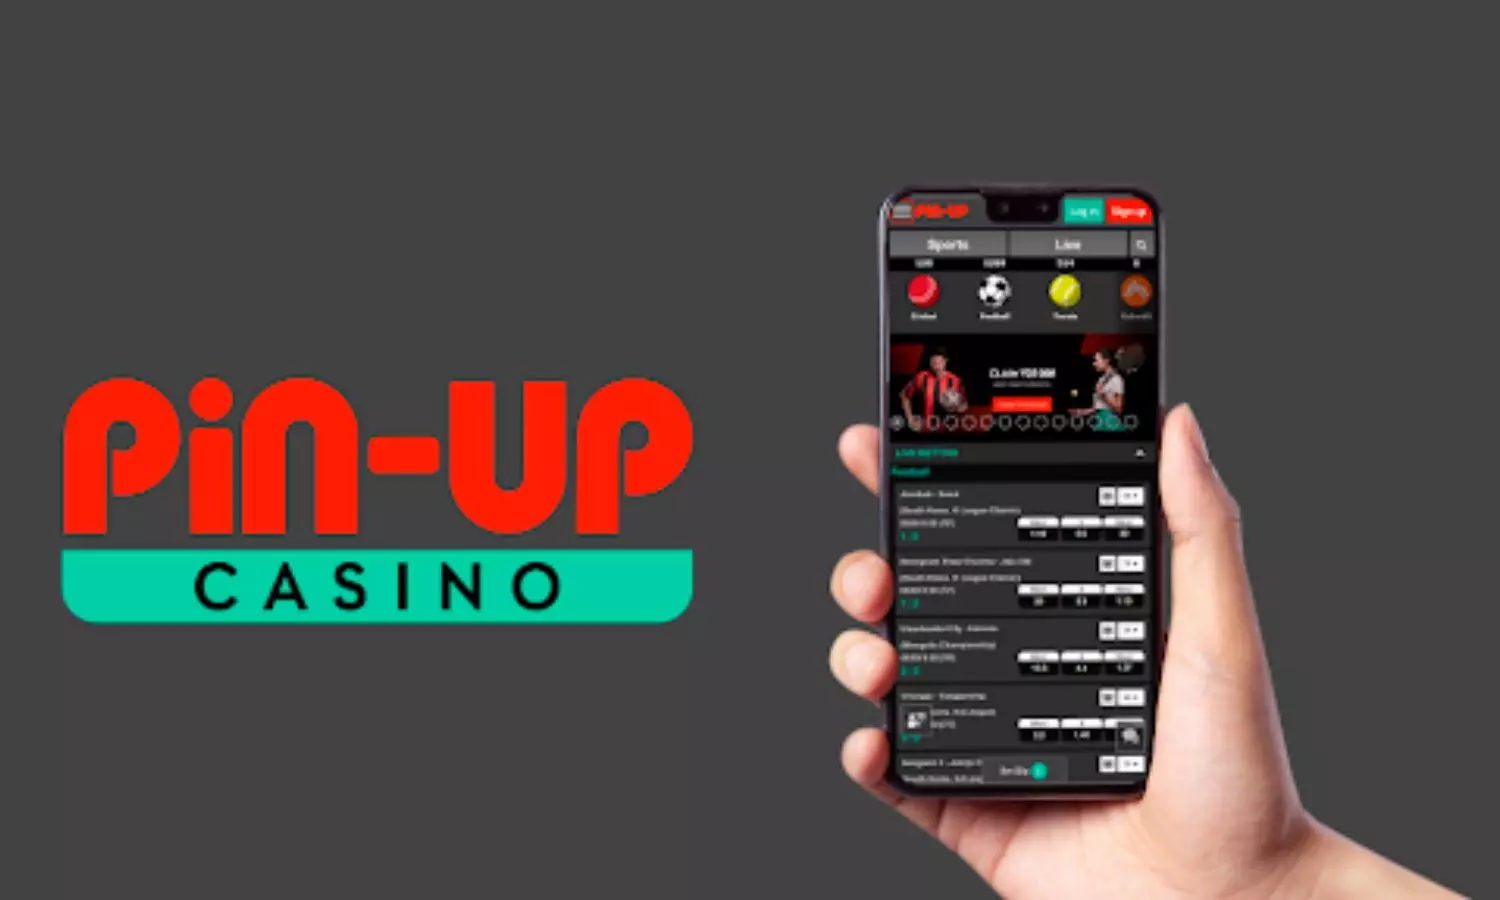 Pin Up Casino Site